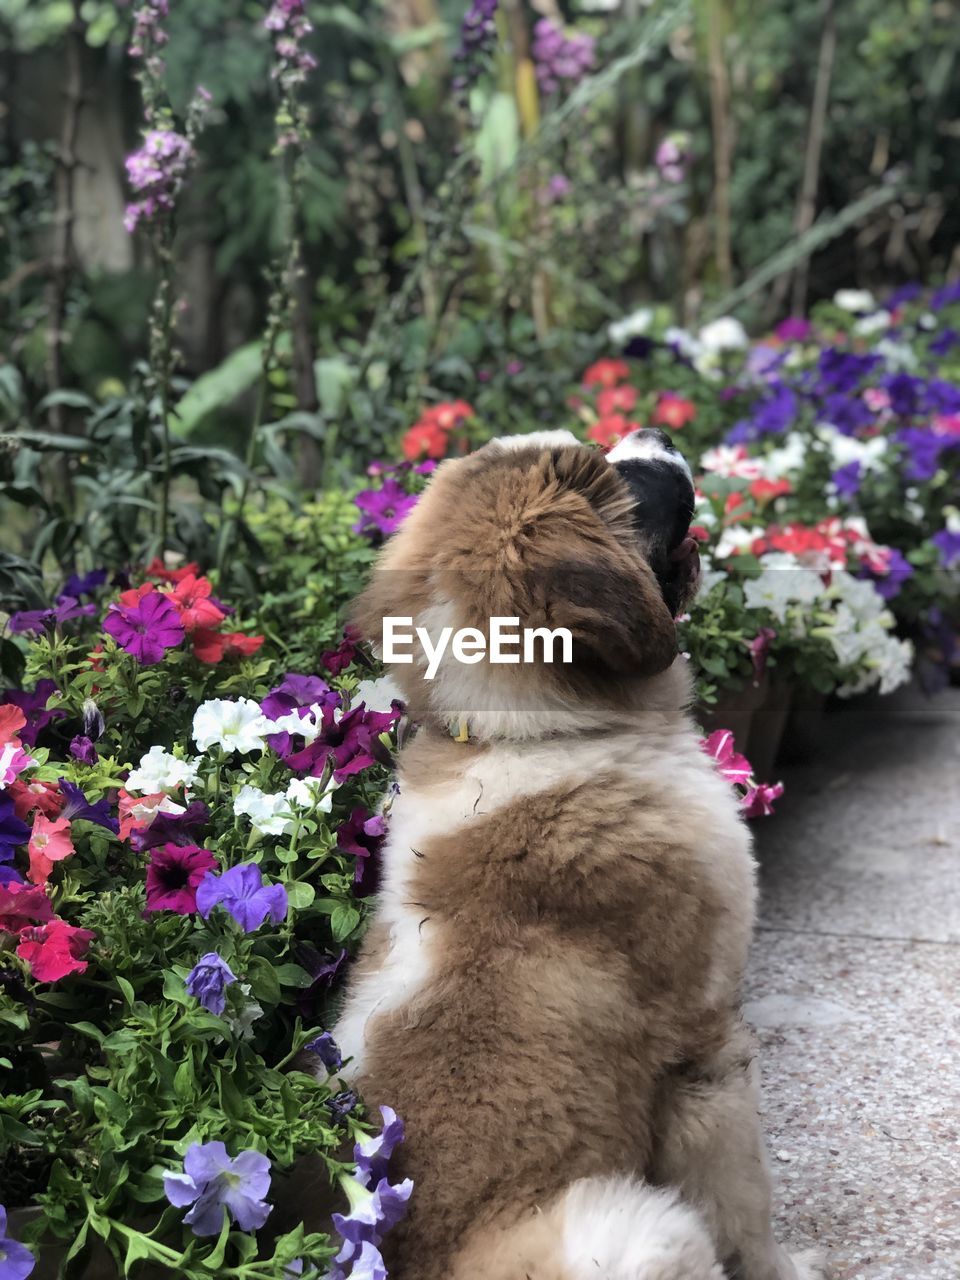 VIEW OF DOG LOOKING AT FLOWER